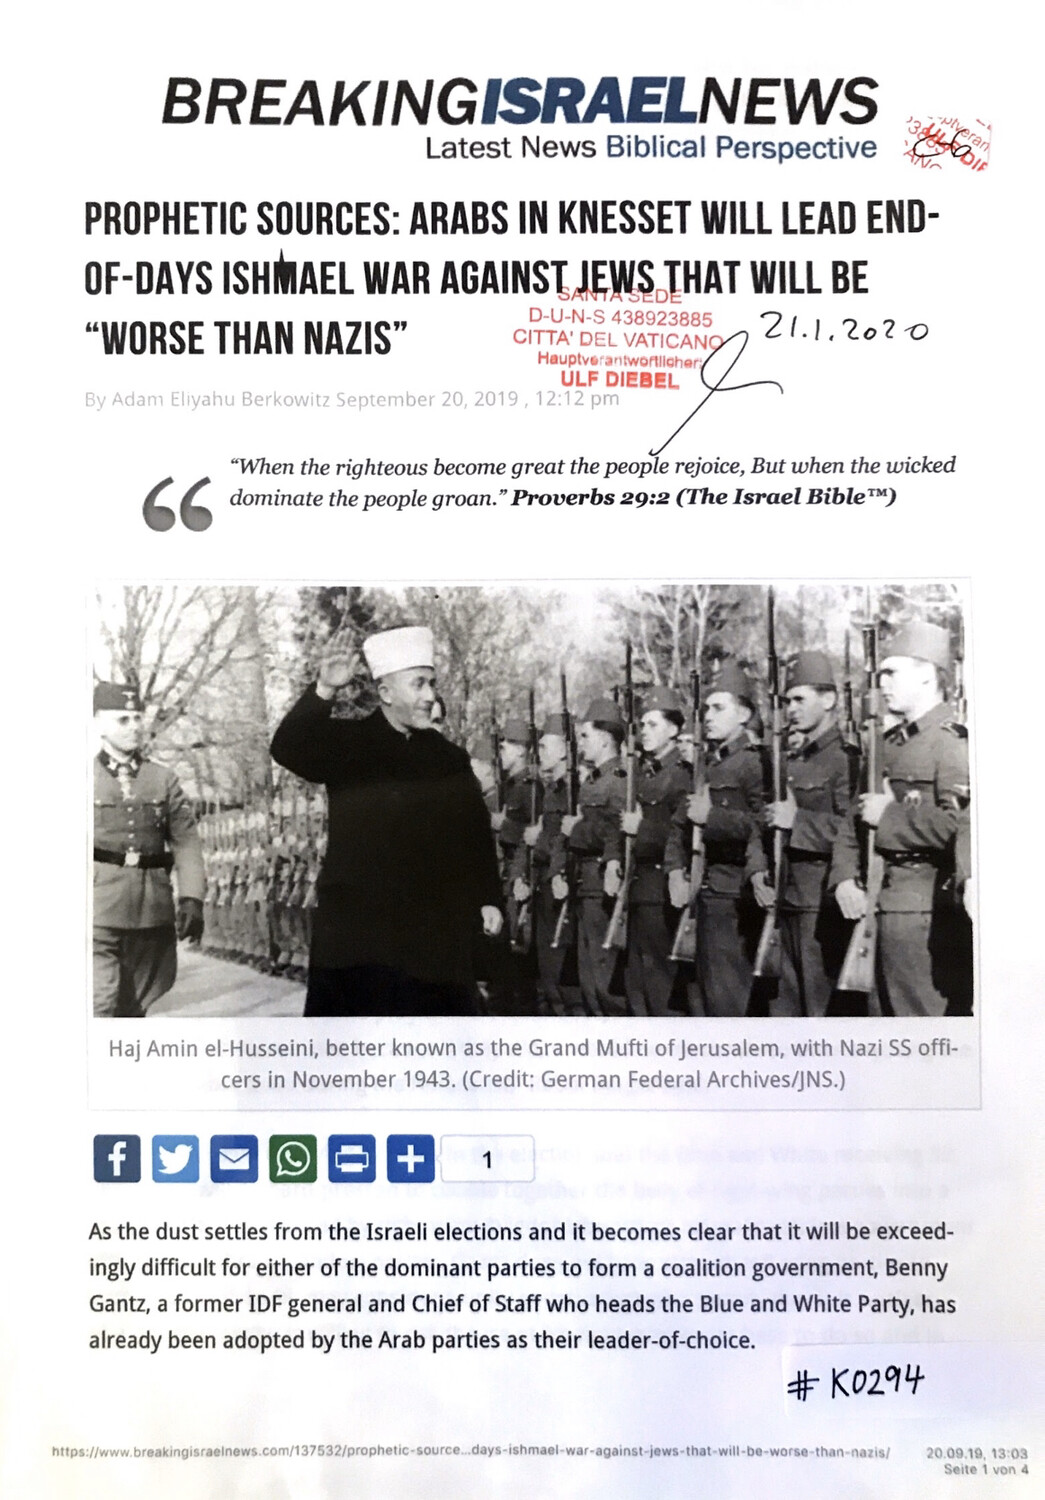 #K0294 l Breaking Israel News - Prophetic sources: Arabs in Knesset will lead End-of-Days Ishmael War against Jews that will be “Worse than Nazis”